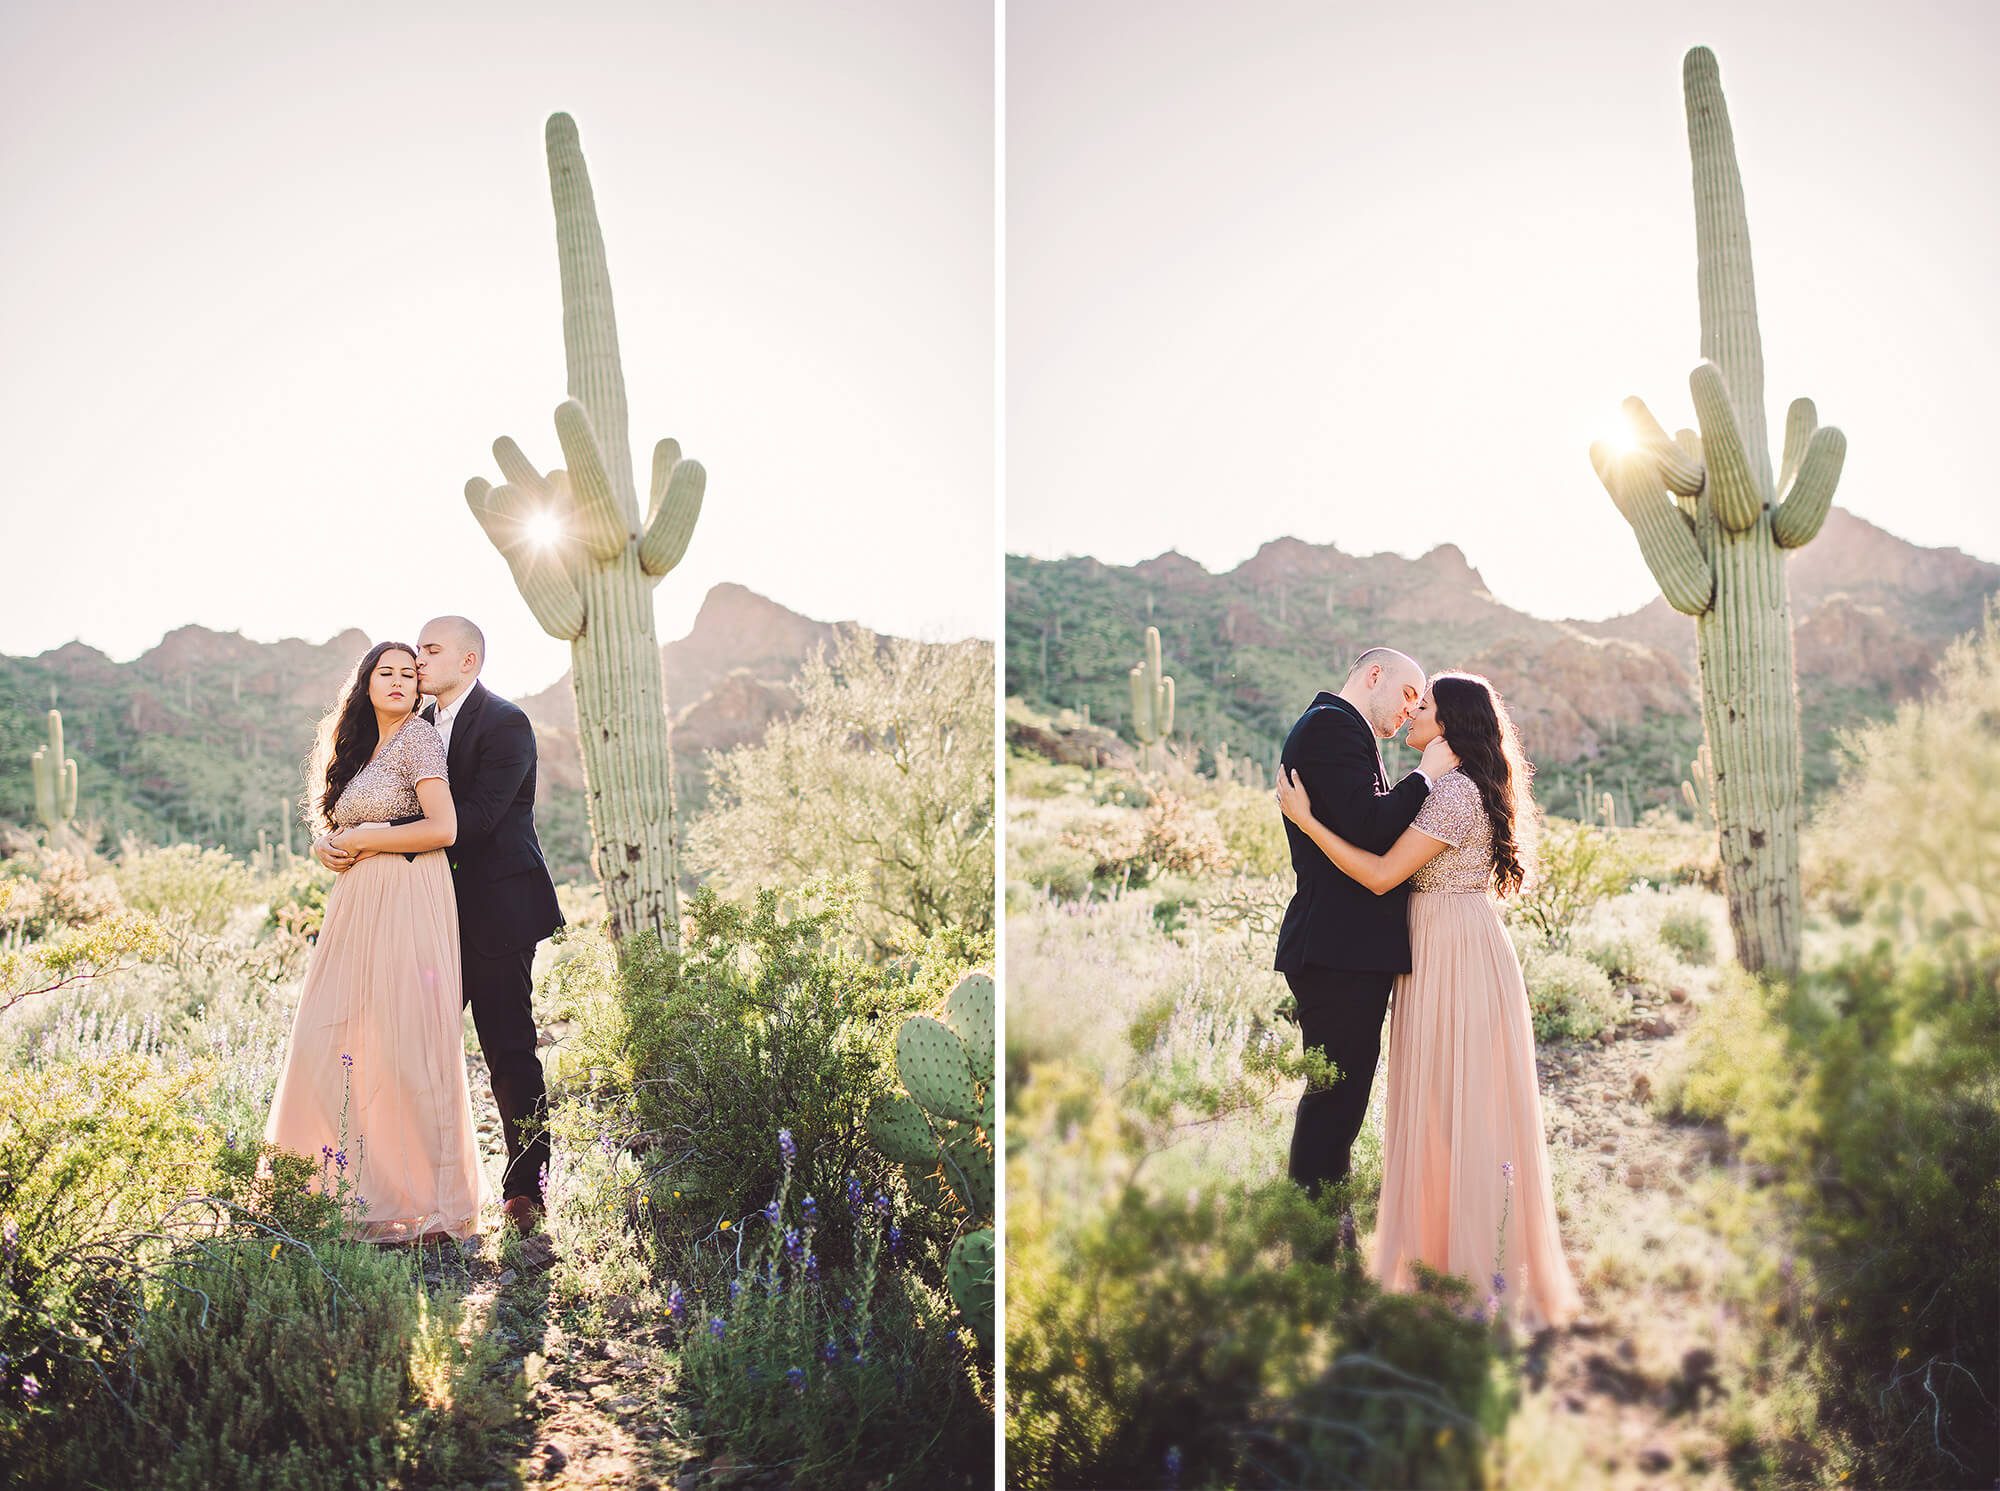 The Paxman's show their love standing beneath sun and saguaros at Picacho Peak during their wildflower couple's session